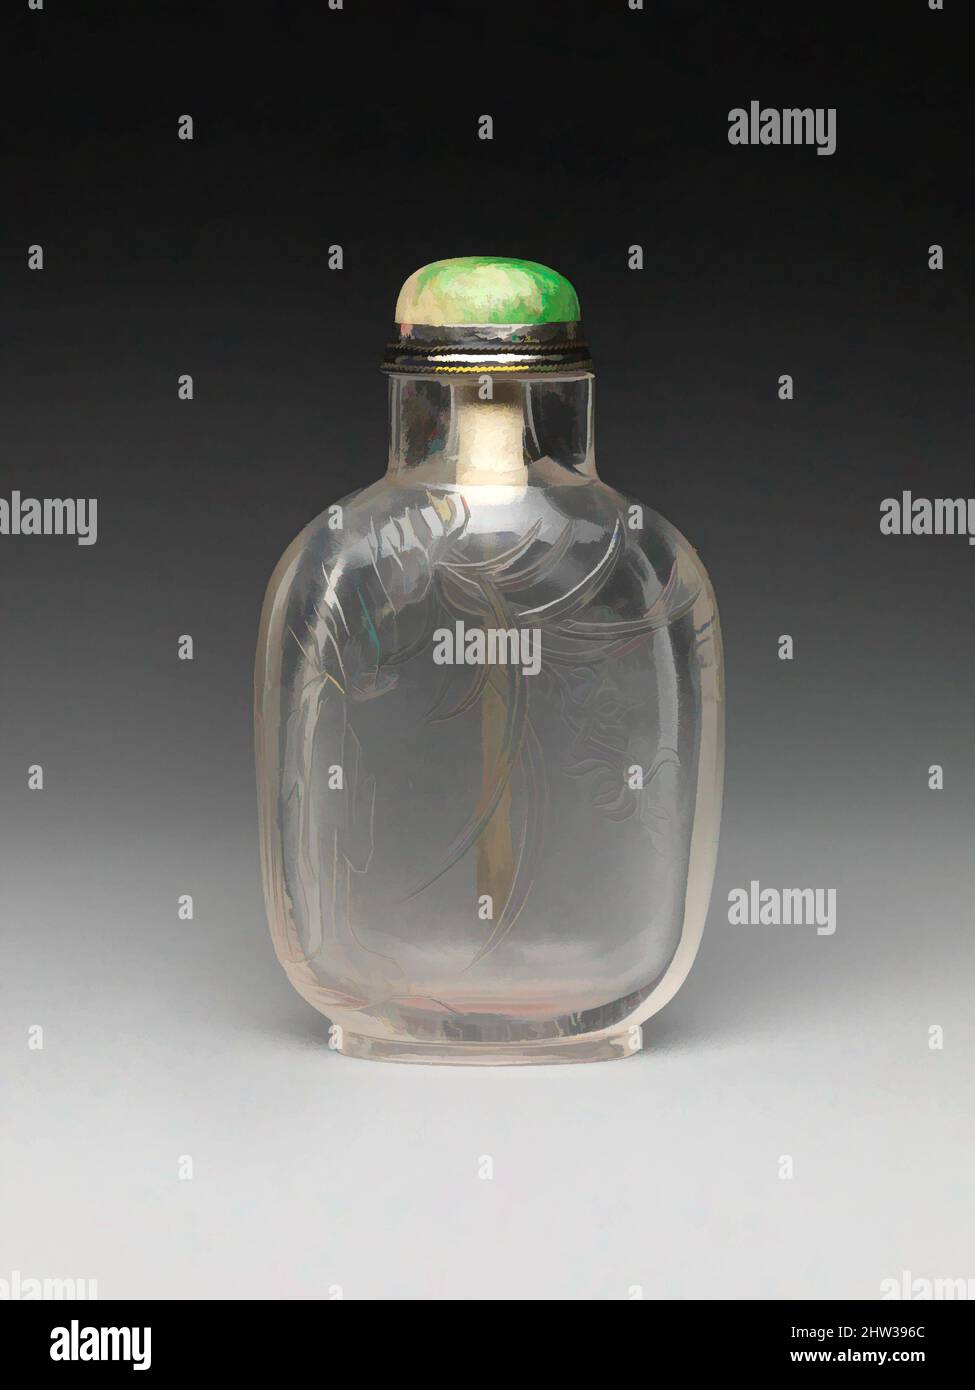 Art inspired by Snuff Bottle with Orchids, Qing dynasty (1644–1911), late 18th–early 19th century, China, Rock crystal with jadeite stopper, H. 3 1/4 in. (8.3 cm); W. 1 7/8 in. (4.8 cm); D. 1 in. (2.5 cm), Snuff Bottles, Classic works modernized by Artotop with a splash of modernity. Shapes, color and value, eye-catching visual impact on art. Emotions through freedom of artworks in a contemporary way. A timeless message pursuing a wildly creative new direction. Artists turning to the digital medium and creating the Artotop NFT Stock Photo